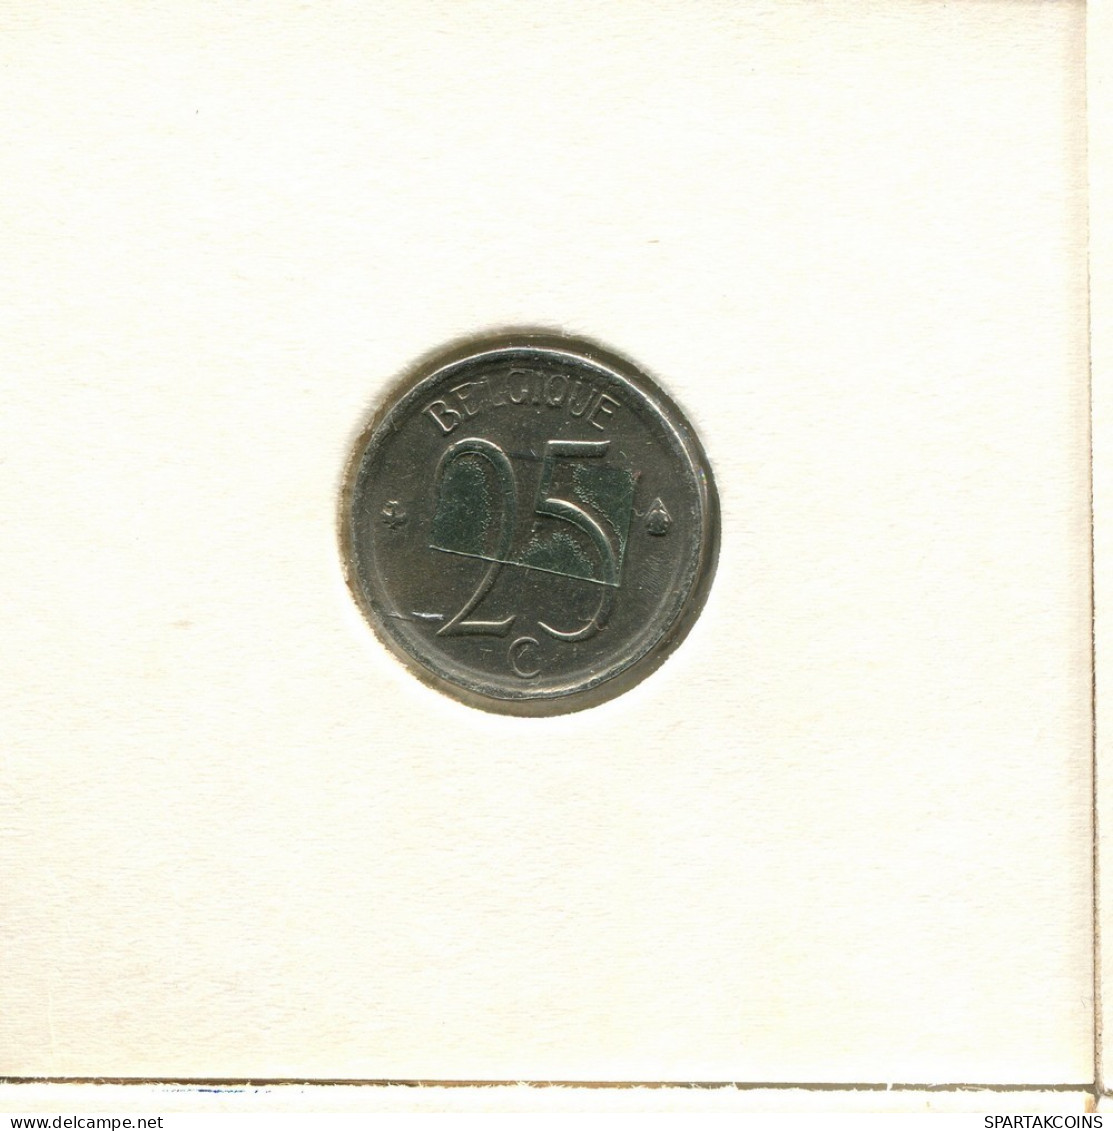 25 CENTIMES 1968 FRENCH Text BELGIUM Coin #BB267.U.A - 25 Centimes